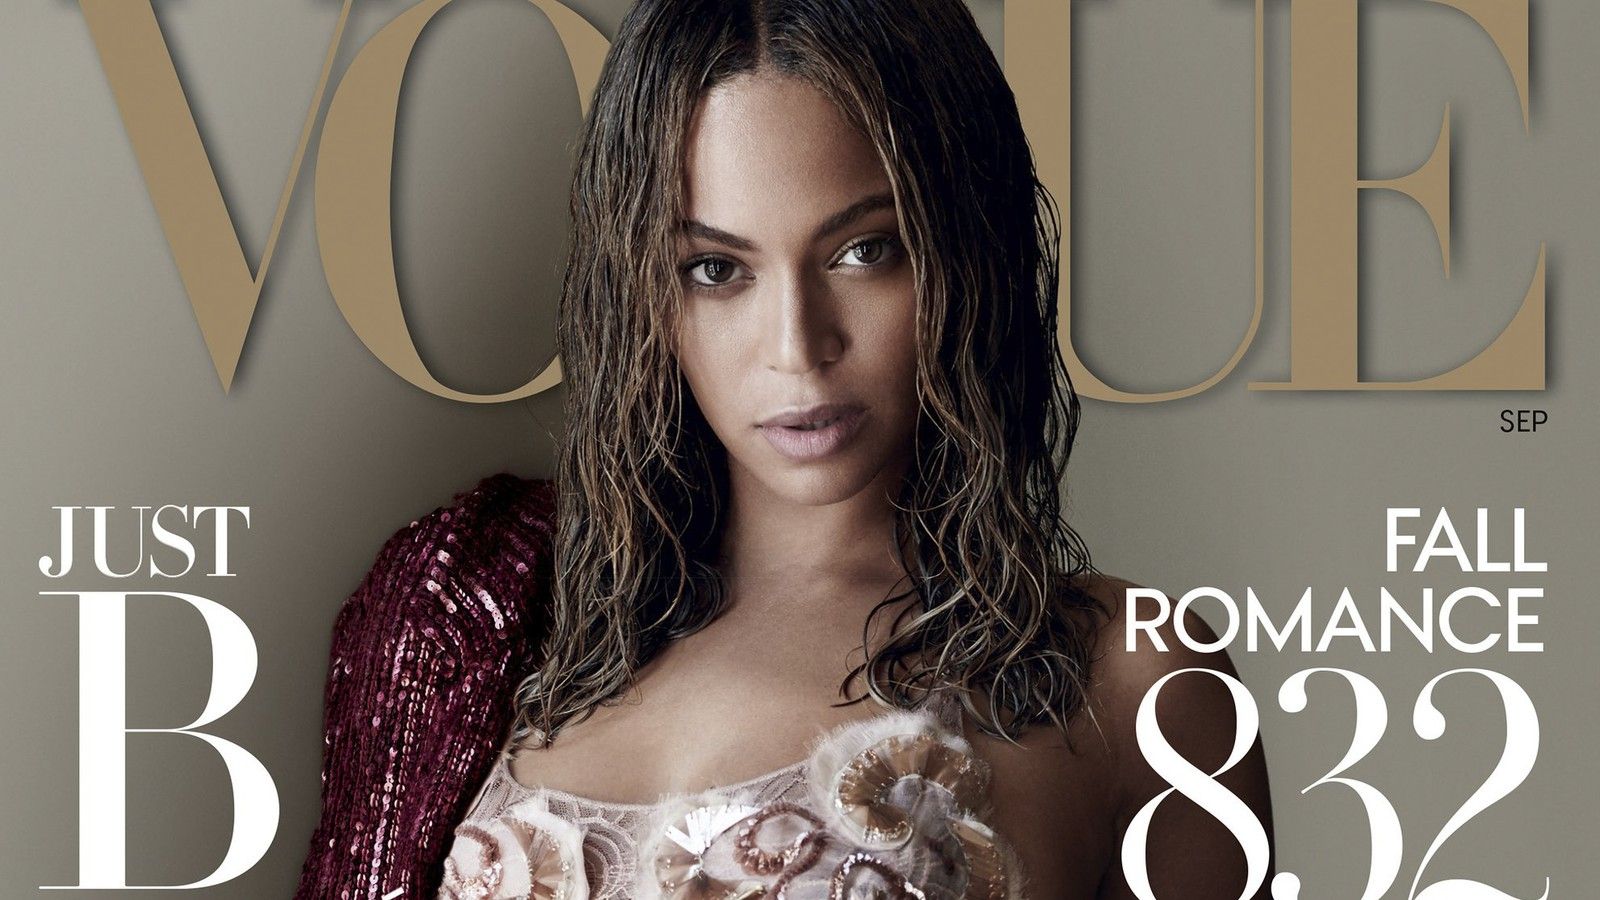 Beyoncé's Vogue September Issue Cover and the Politics of Stringy Hair